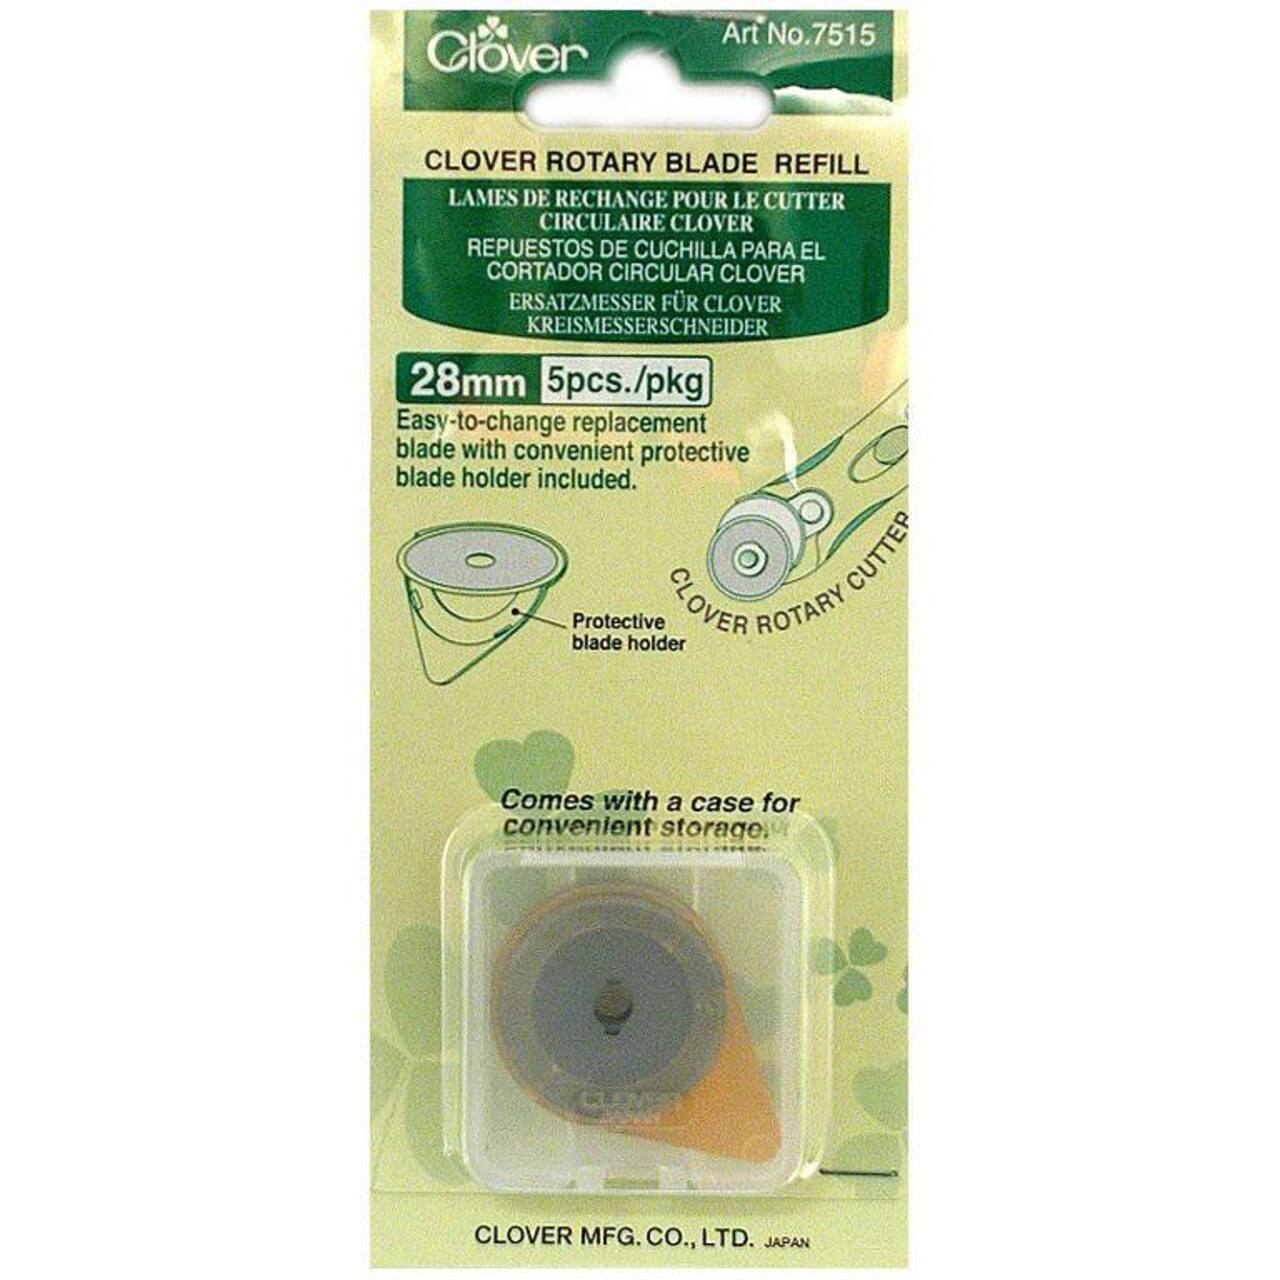 28mm Rotary Cutter Blades by Clover 5 pkg